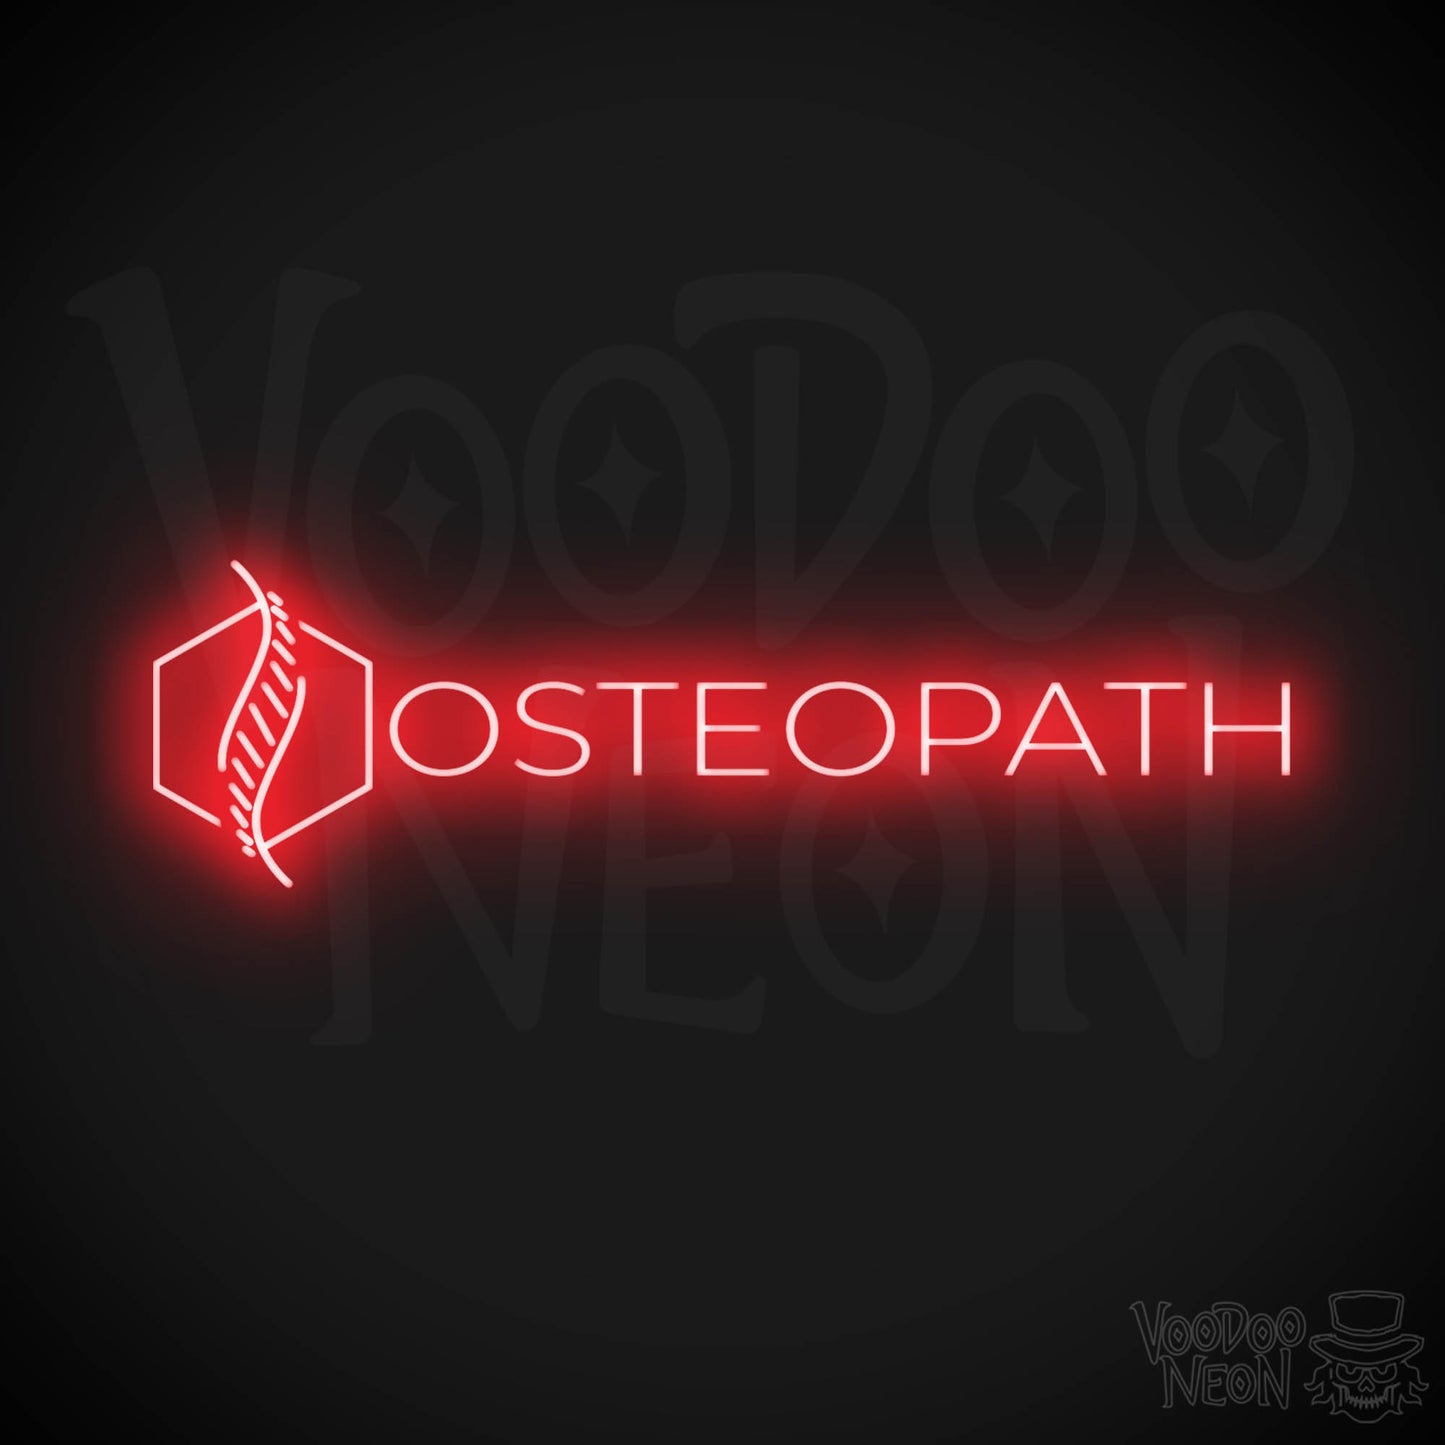 Osteopath LED Neon - Red